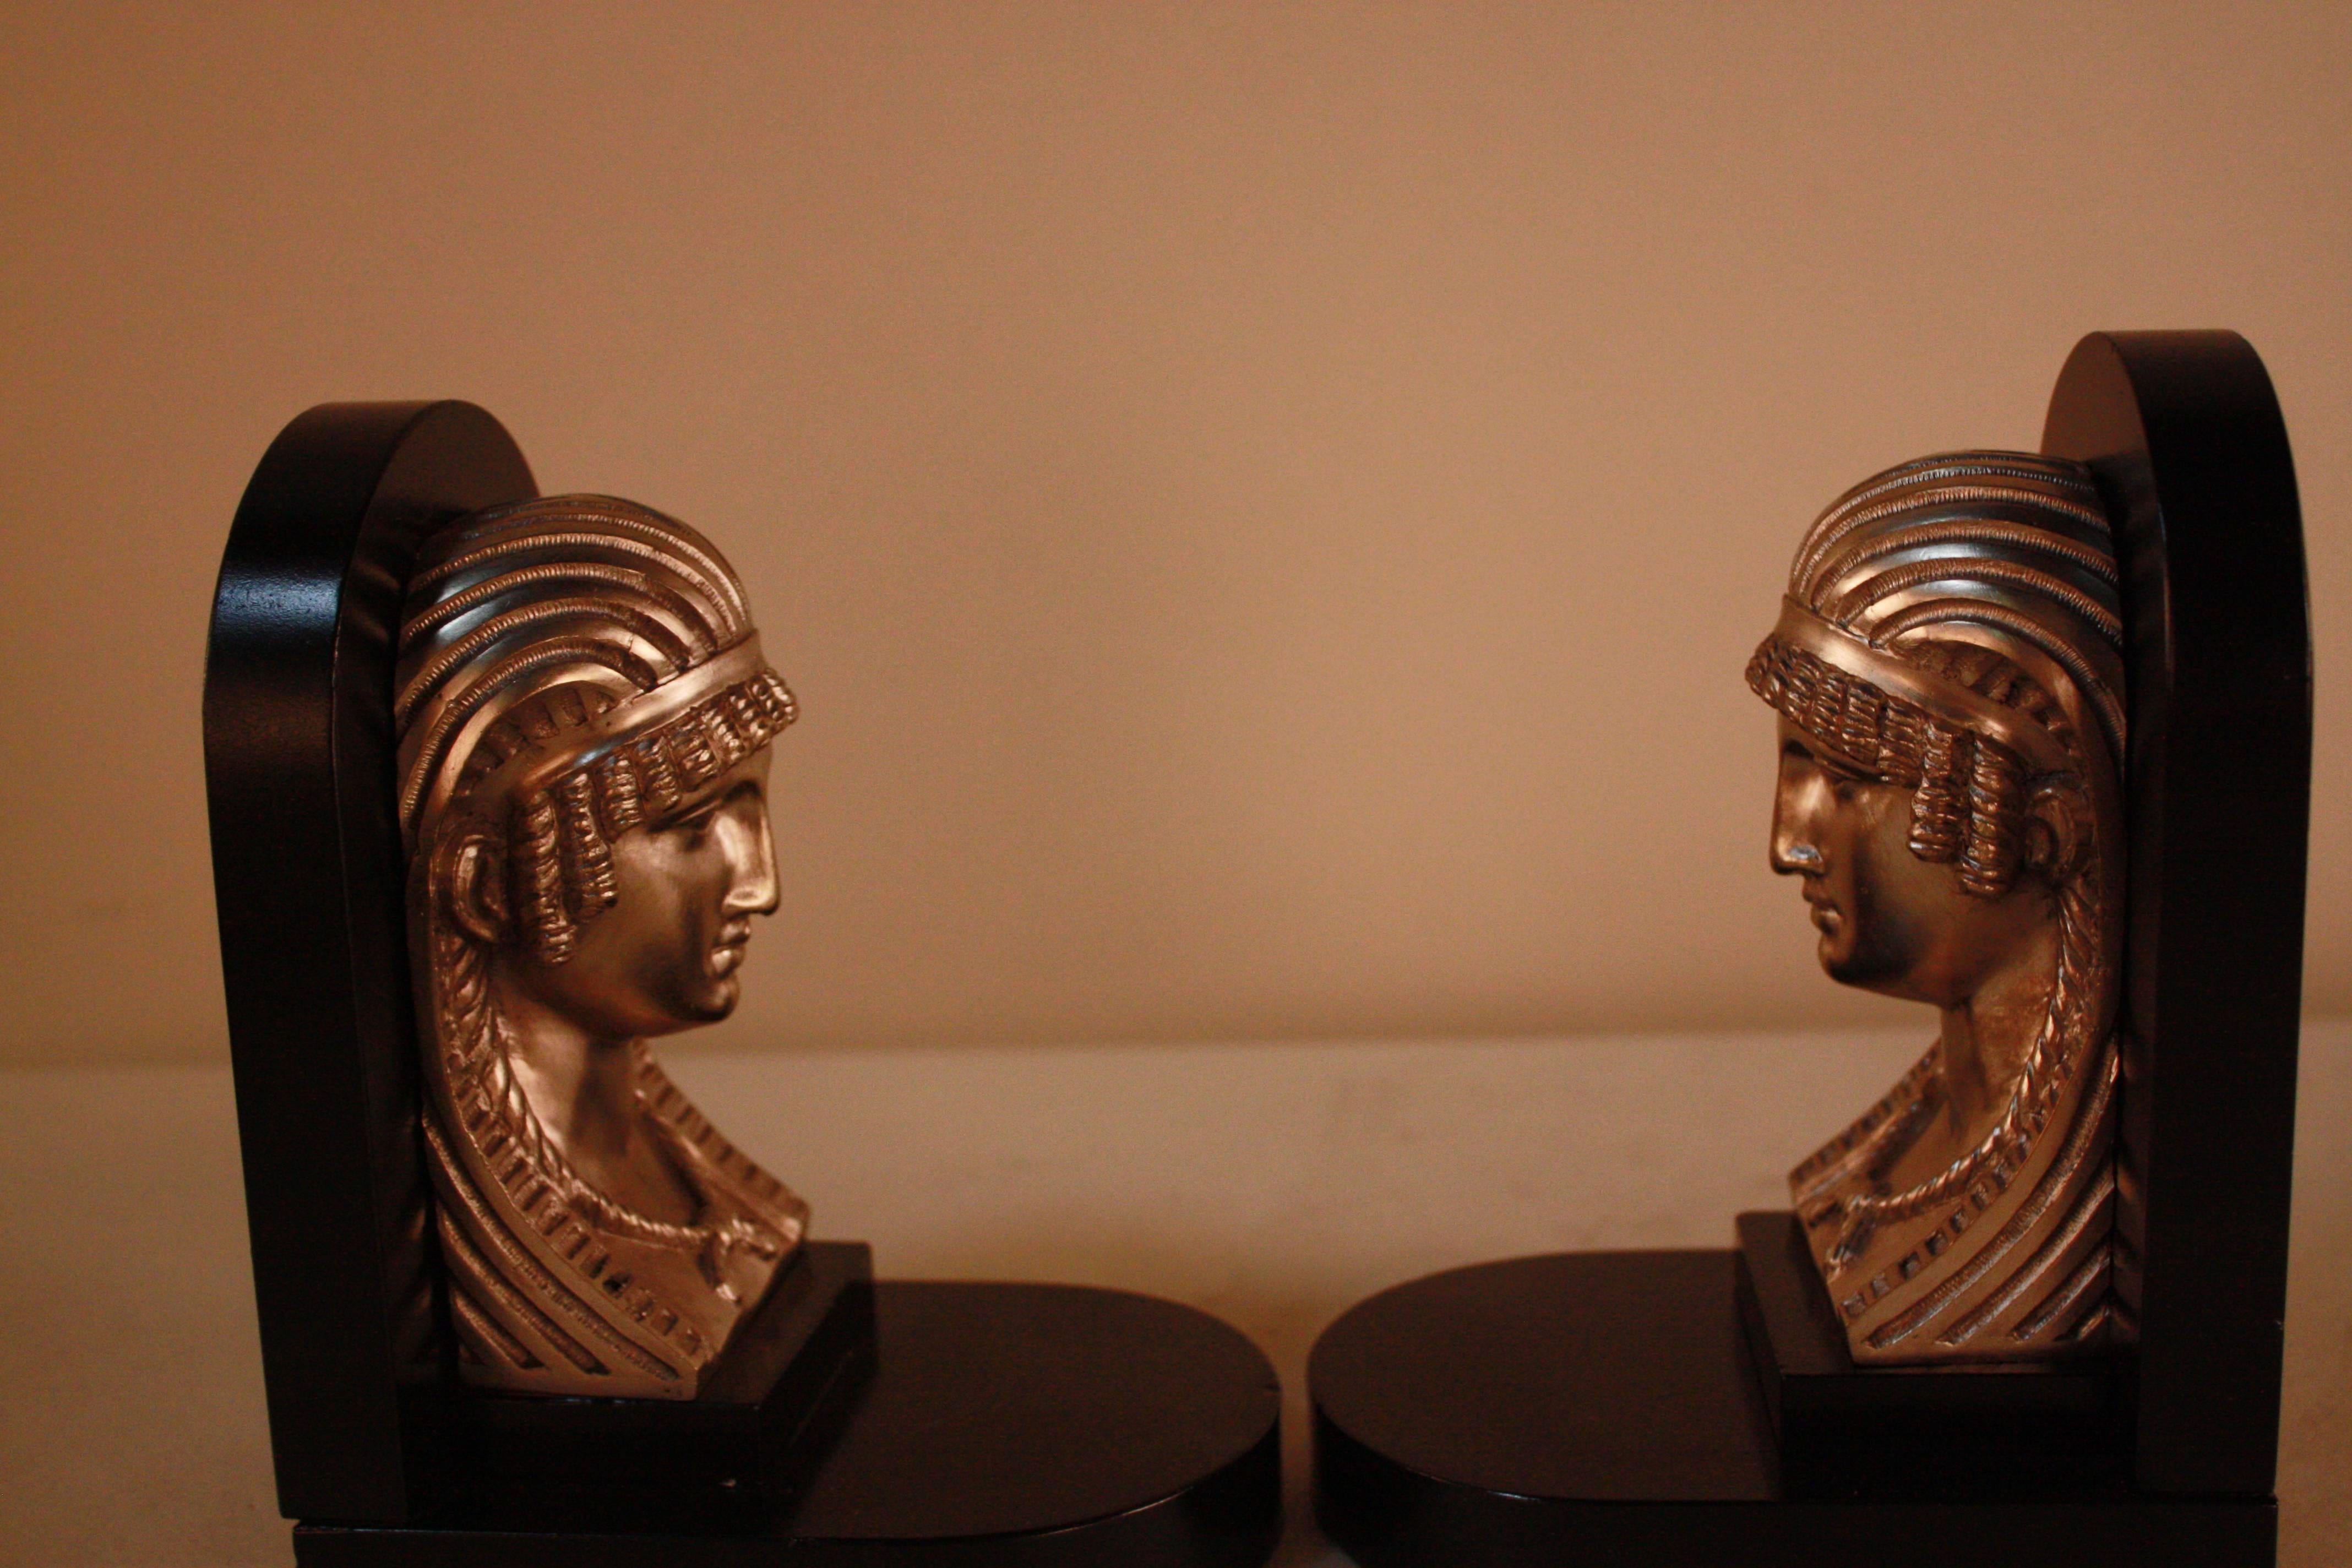 Mid-20th Century Egyptian Revival Art Deco Bookends